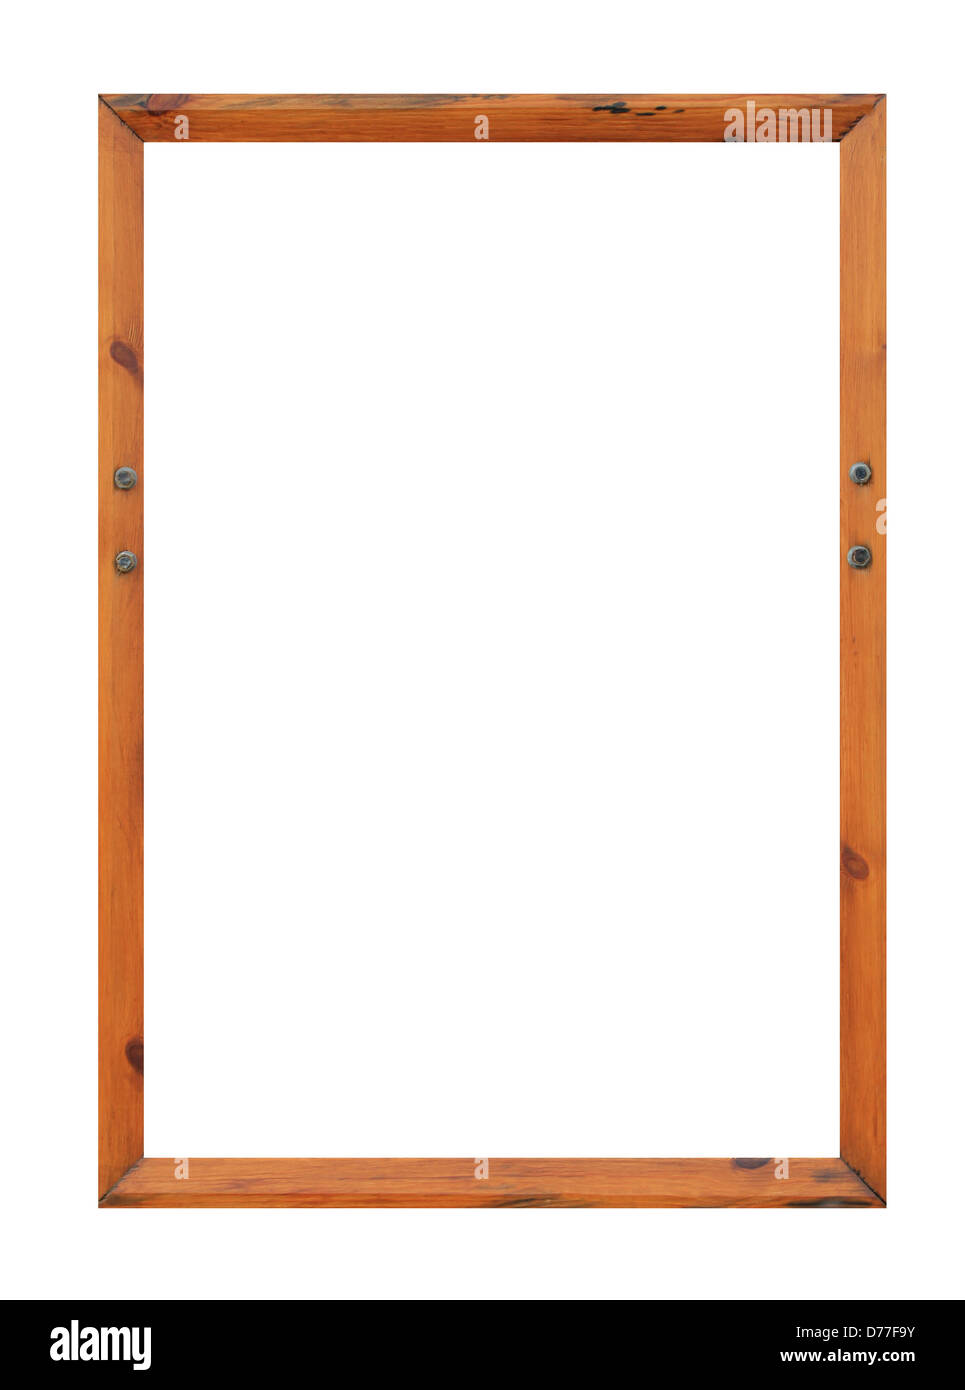 Blank wooden frame isolated on white background with copy space. Stock Photo